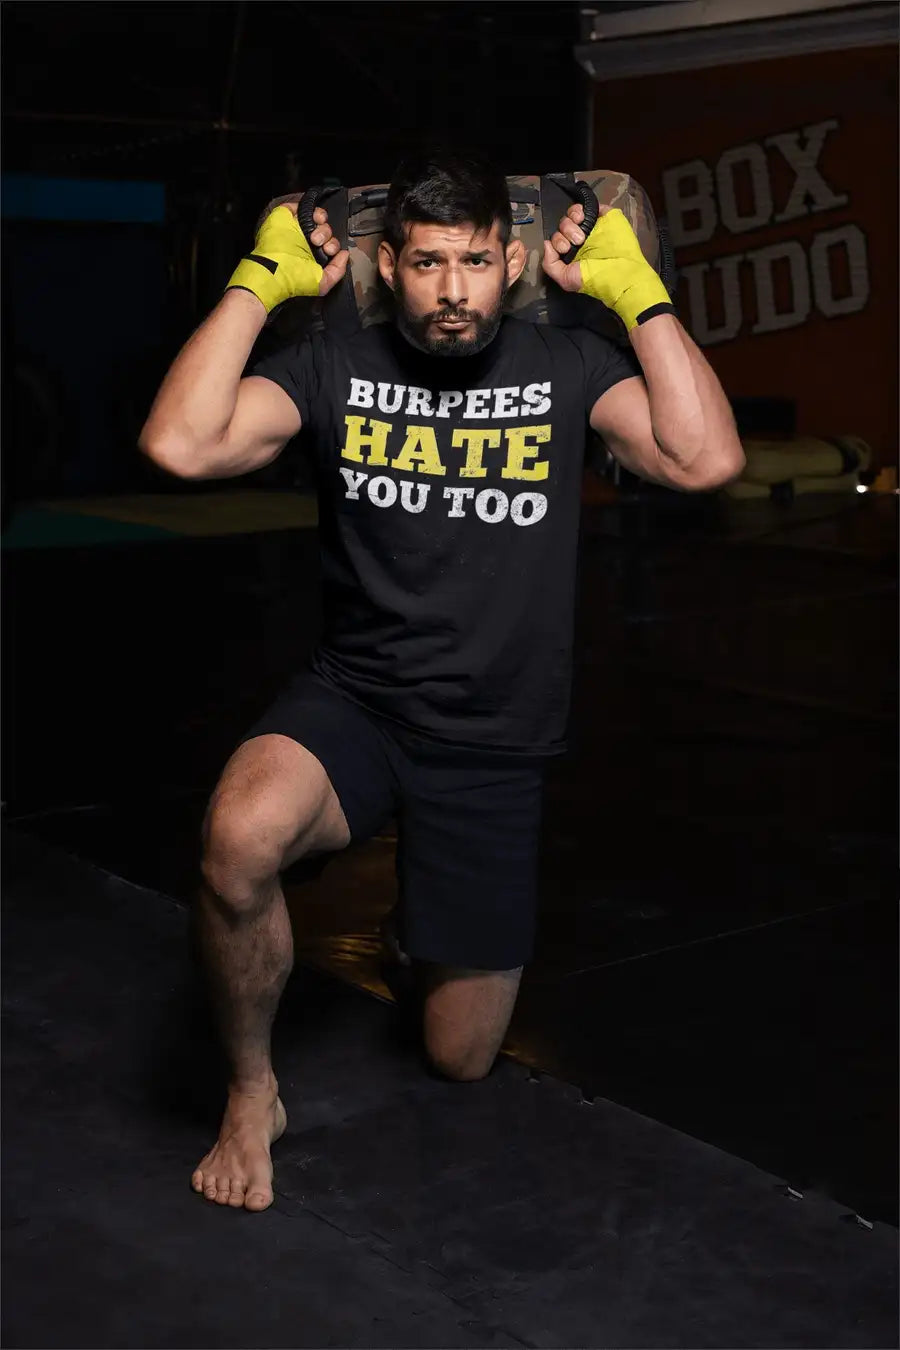 Burpees Hate you Too Dirty Design T Shirt for Men and Women | Premium Design | Catch My Drift India - Catch My Drift India Clothing clothing, general, gym, made in india, shirt, t shirt, tren